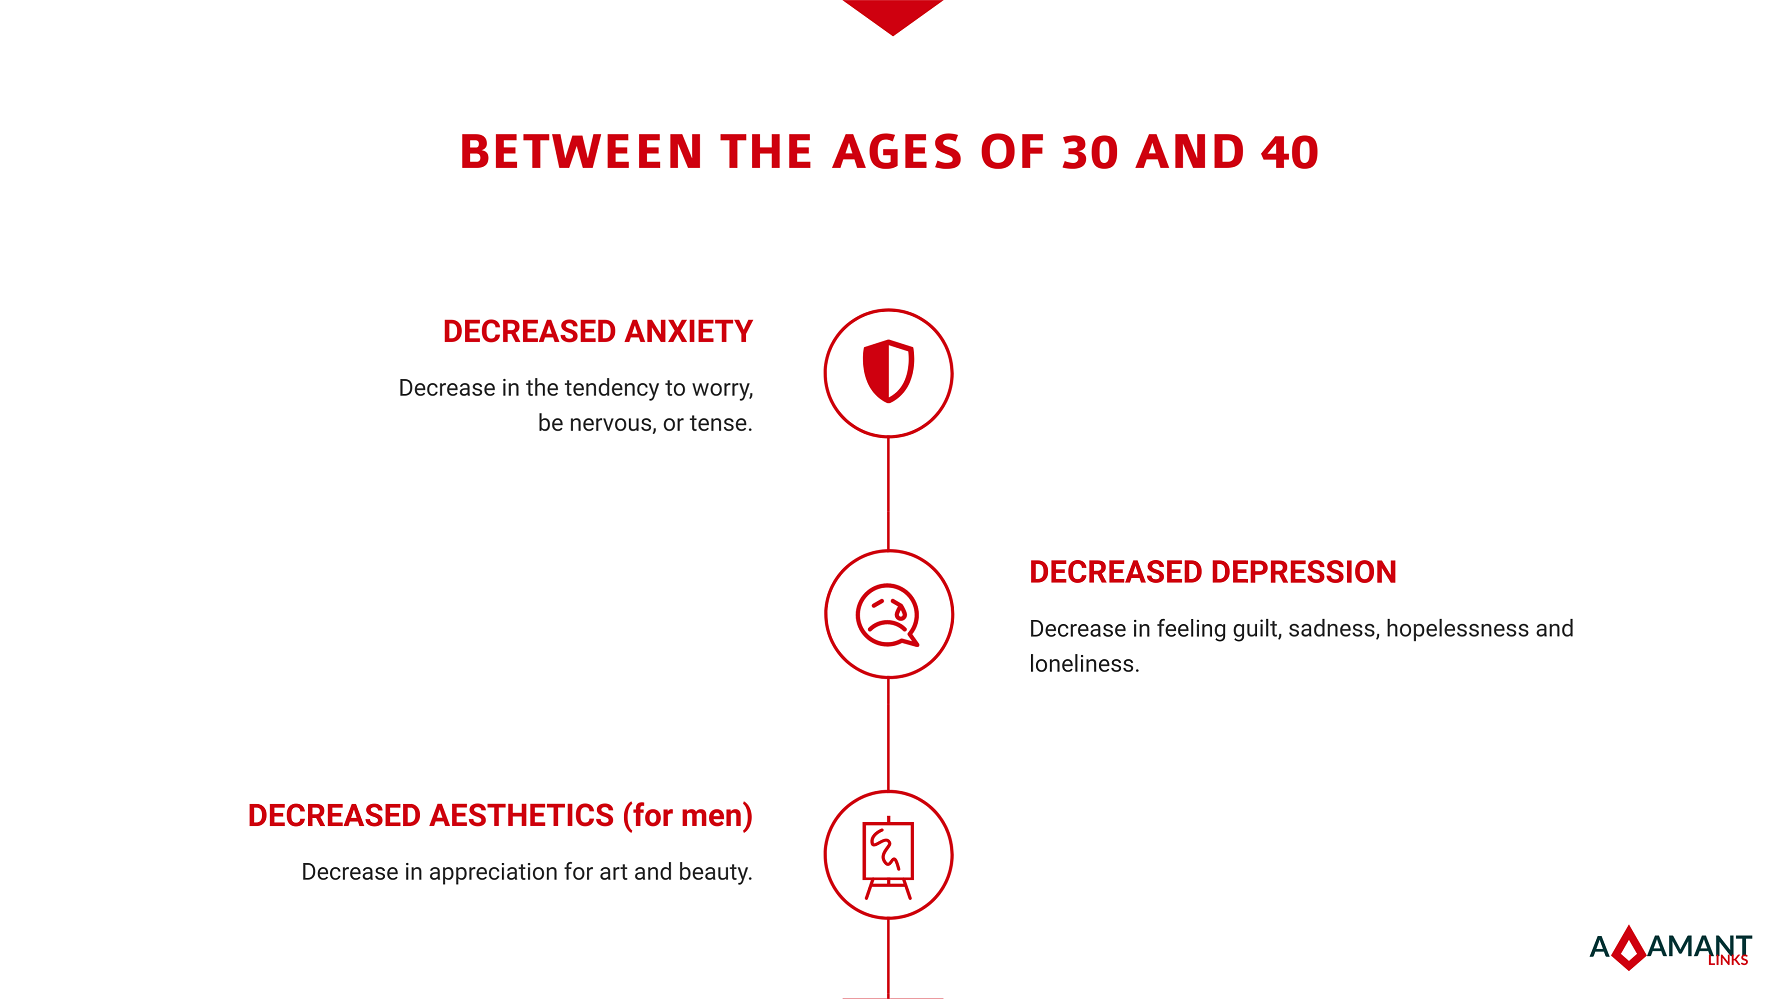 Adamant Links - Psychographics between the ages of 30 and 40